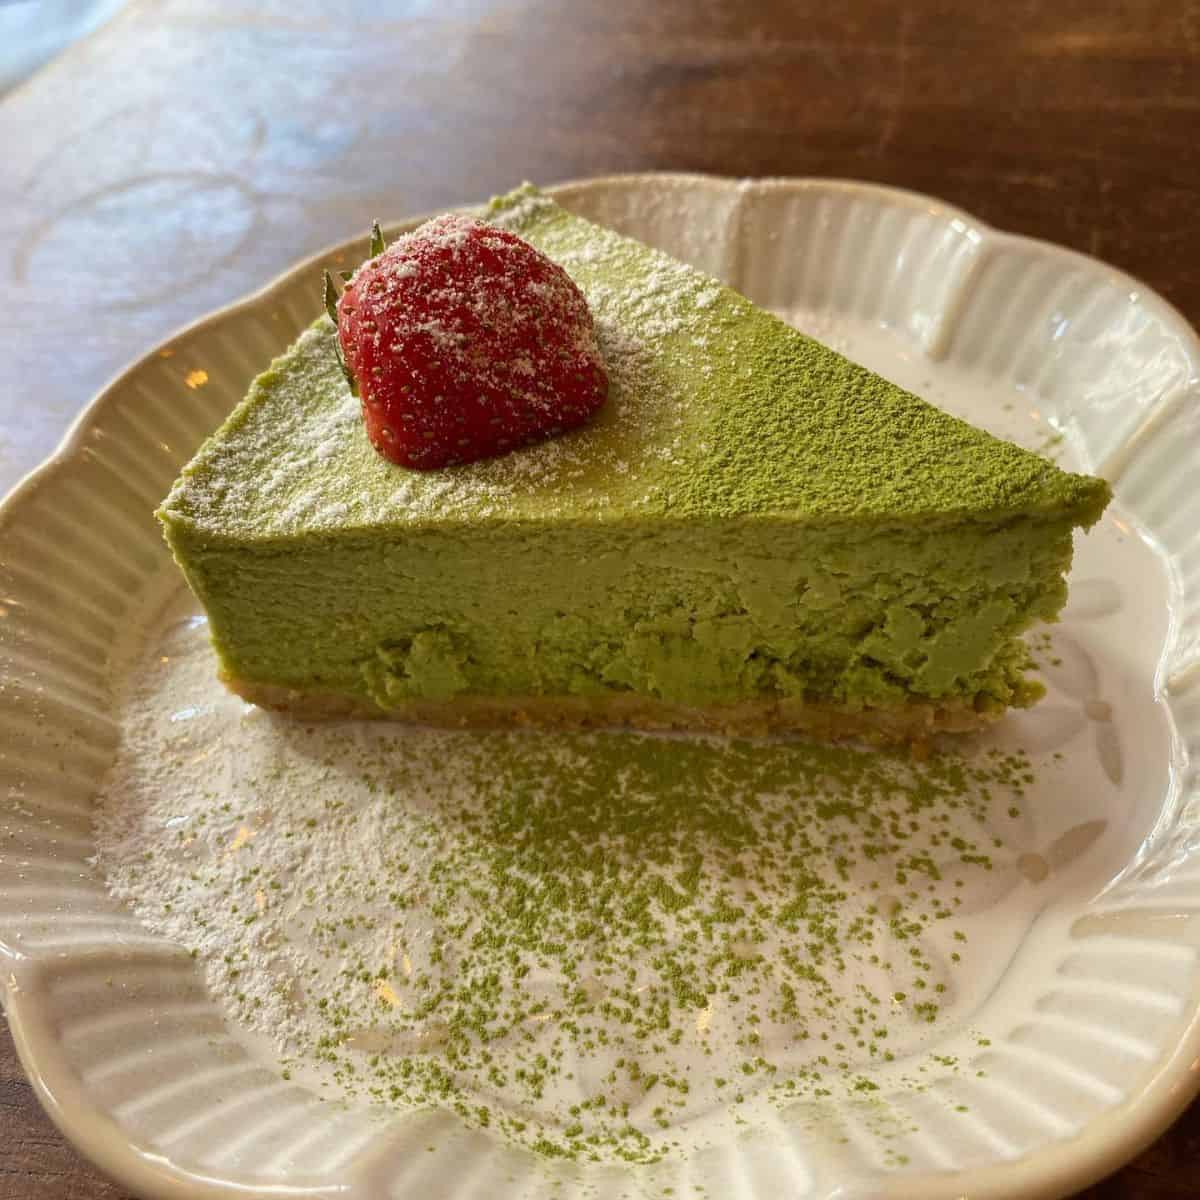 A slice of green tea dessert topped with fresh strawberry on a white ceramic plate